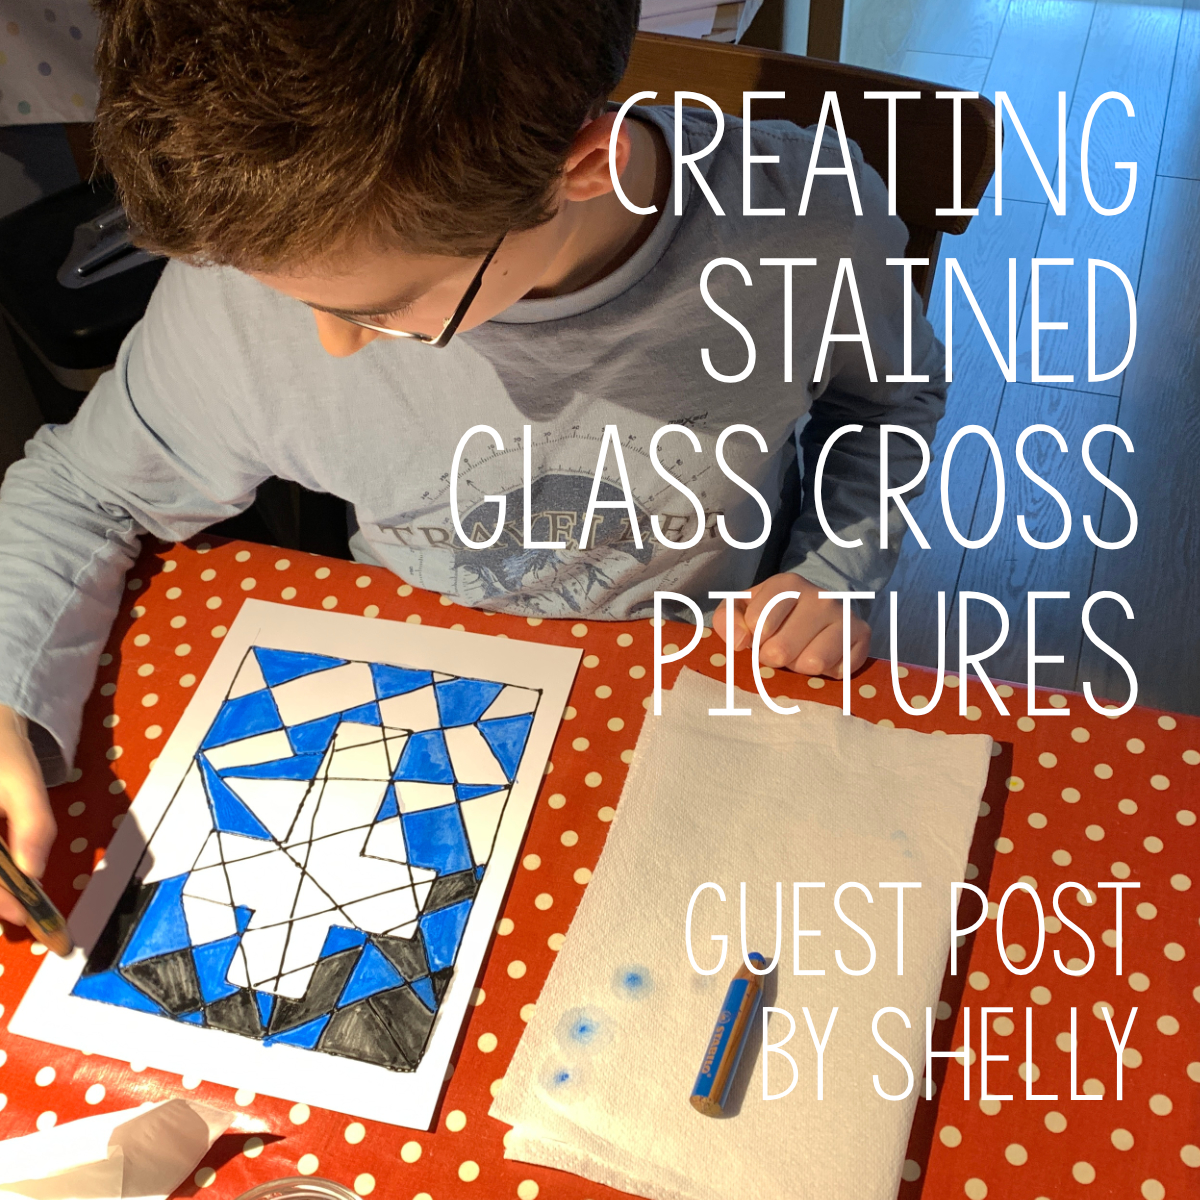 Guest Post - Creating Stained Class Cross Pictures